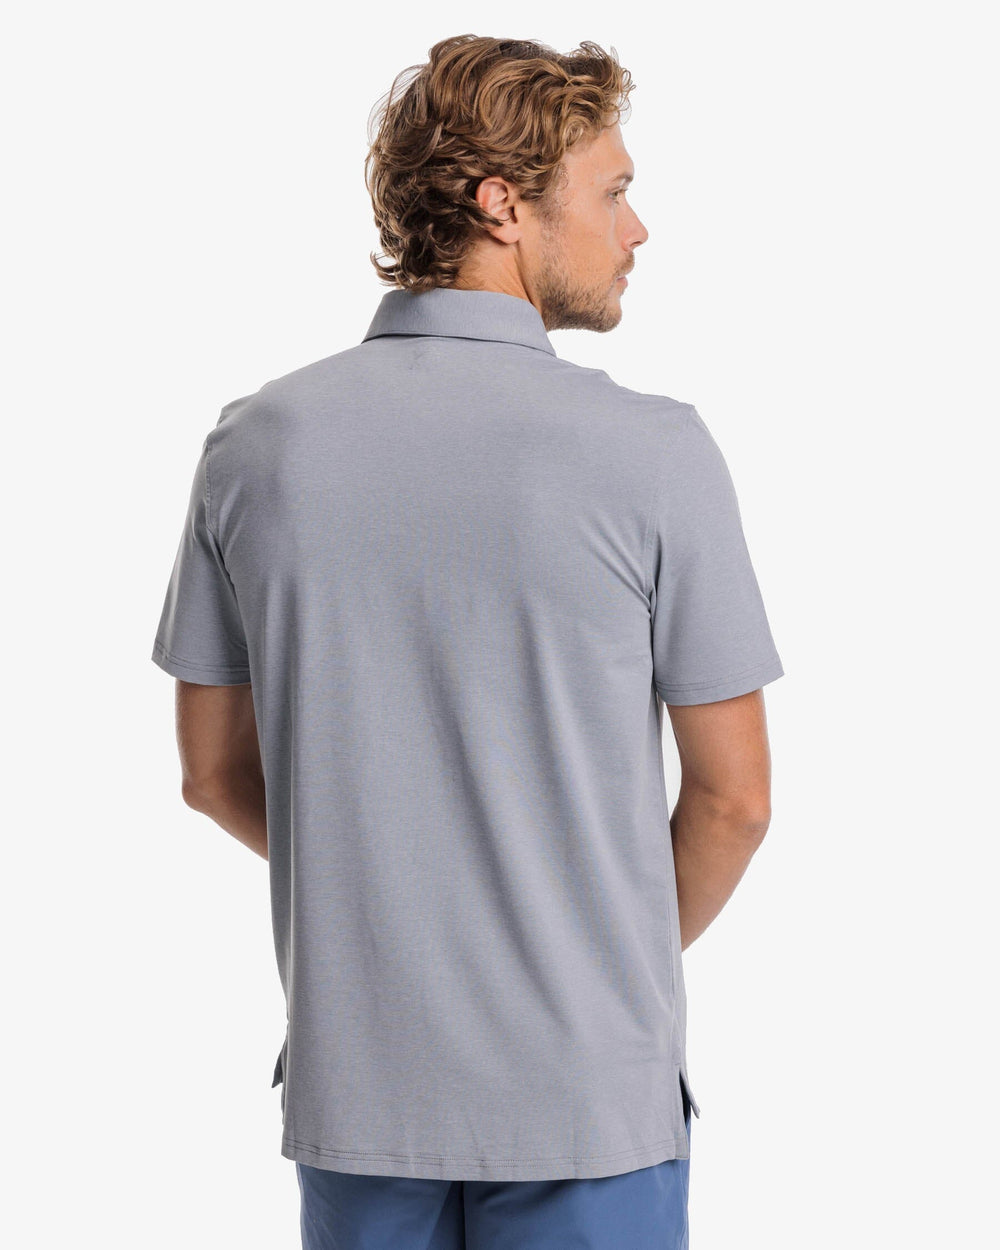 The back view of the brrr°®-eeze Heather Performance Polo Shirt by Southern Tide - Heather Steel Grey